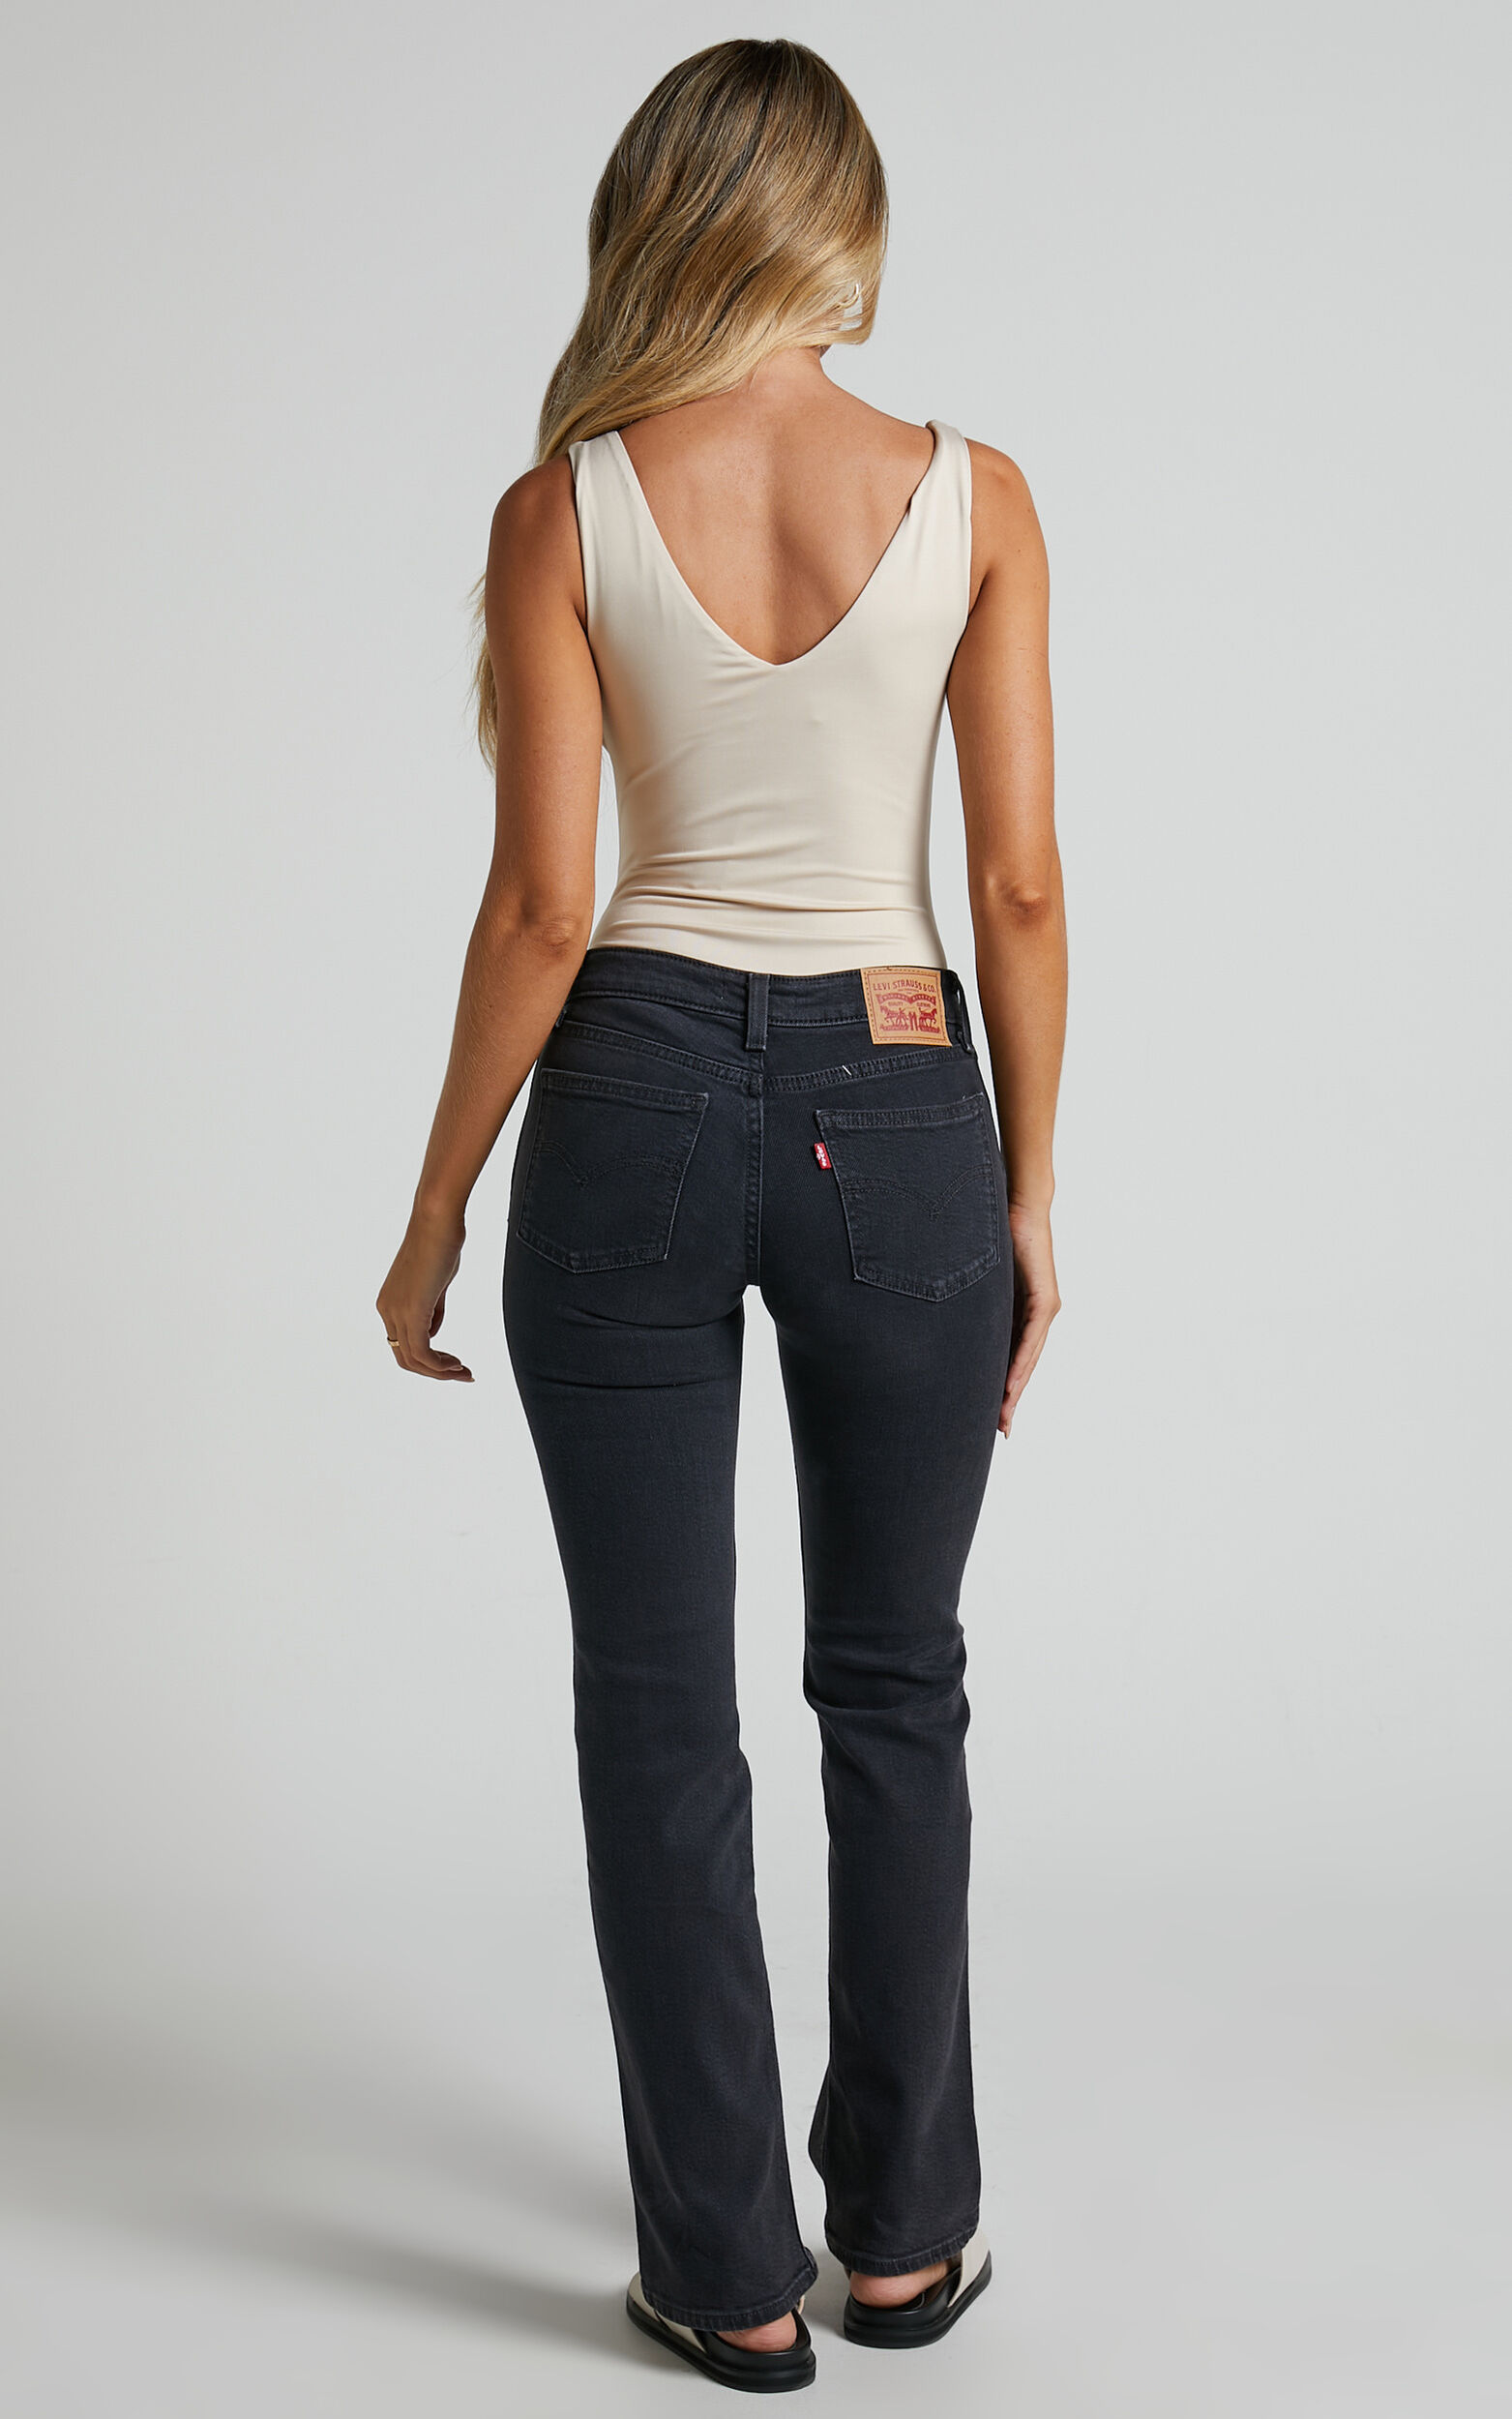 Levi's - Superlow Boot Jeans in First Or Last | Showpo USA